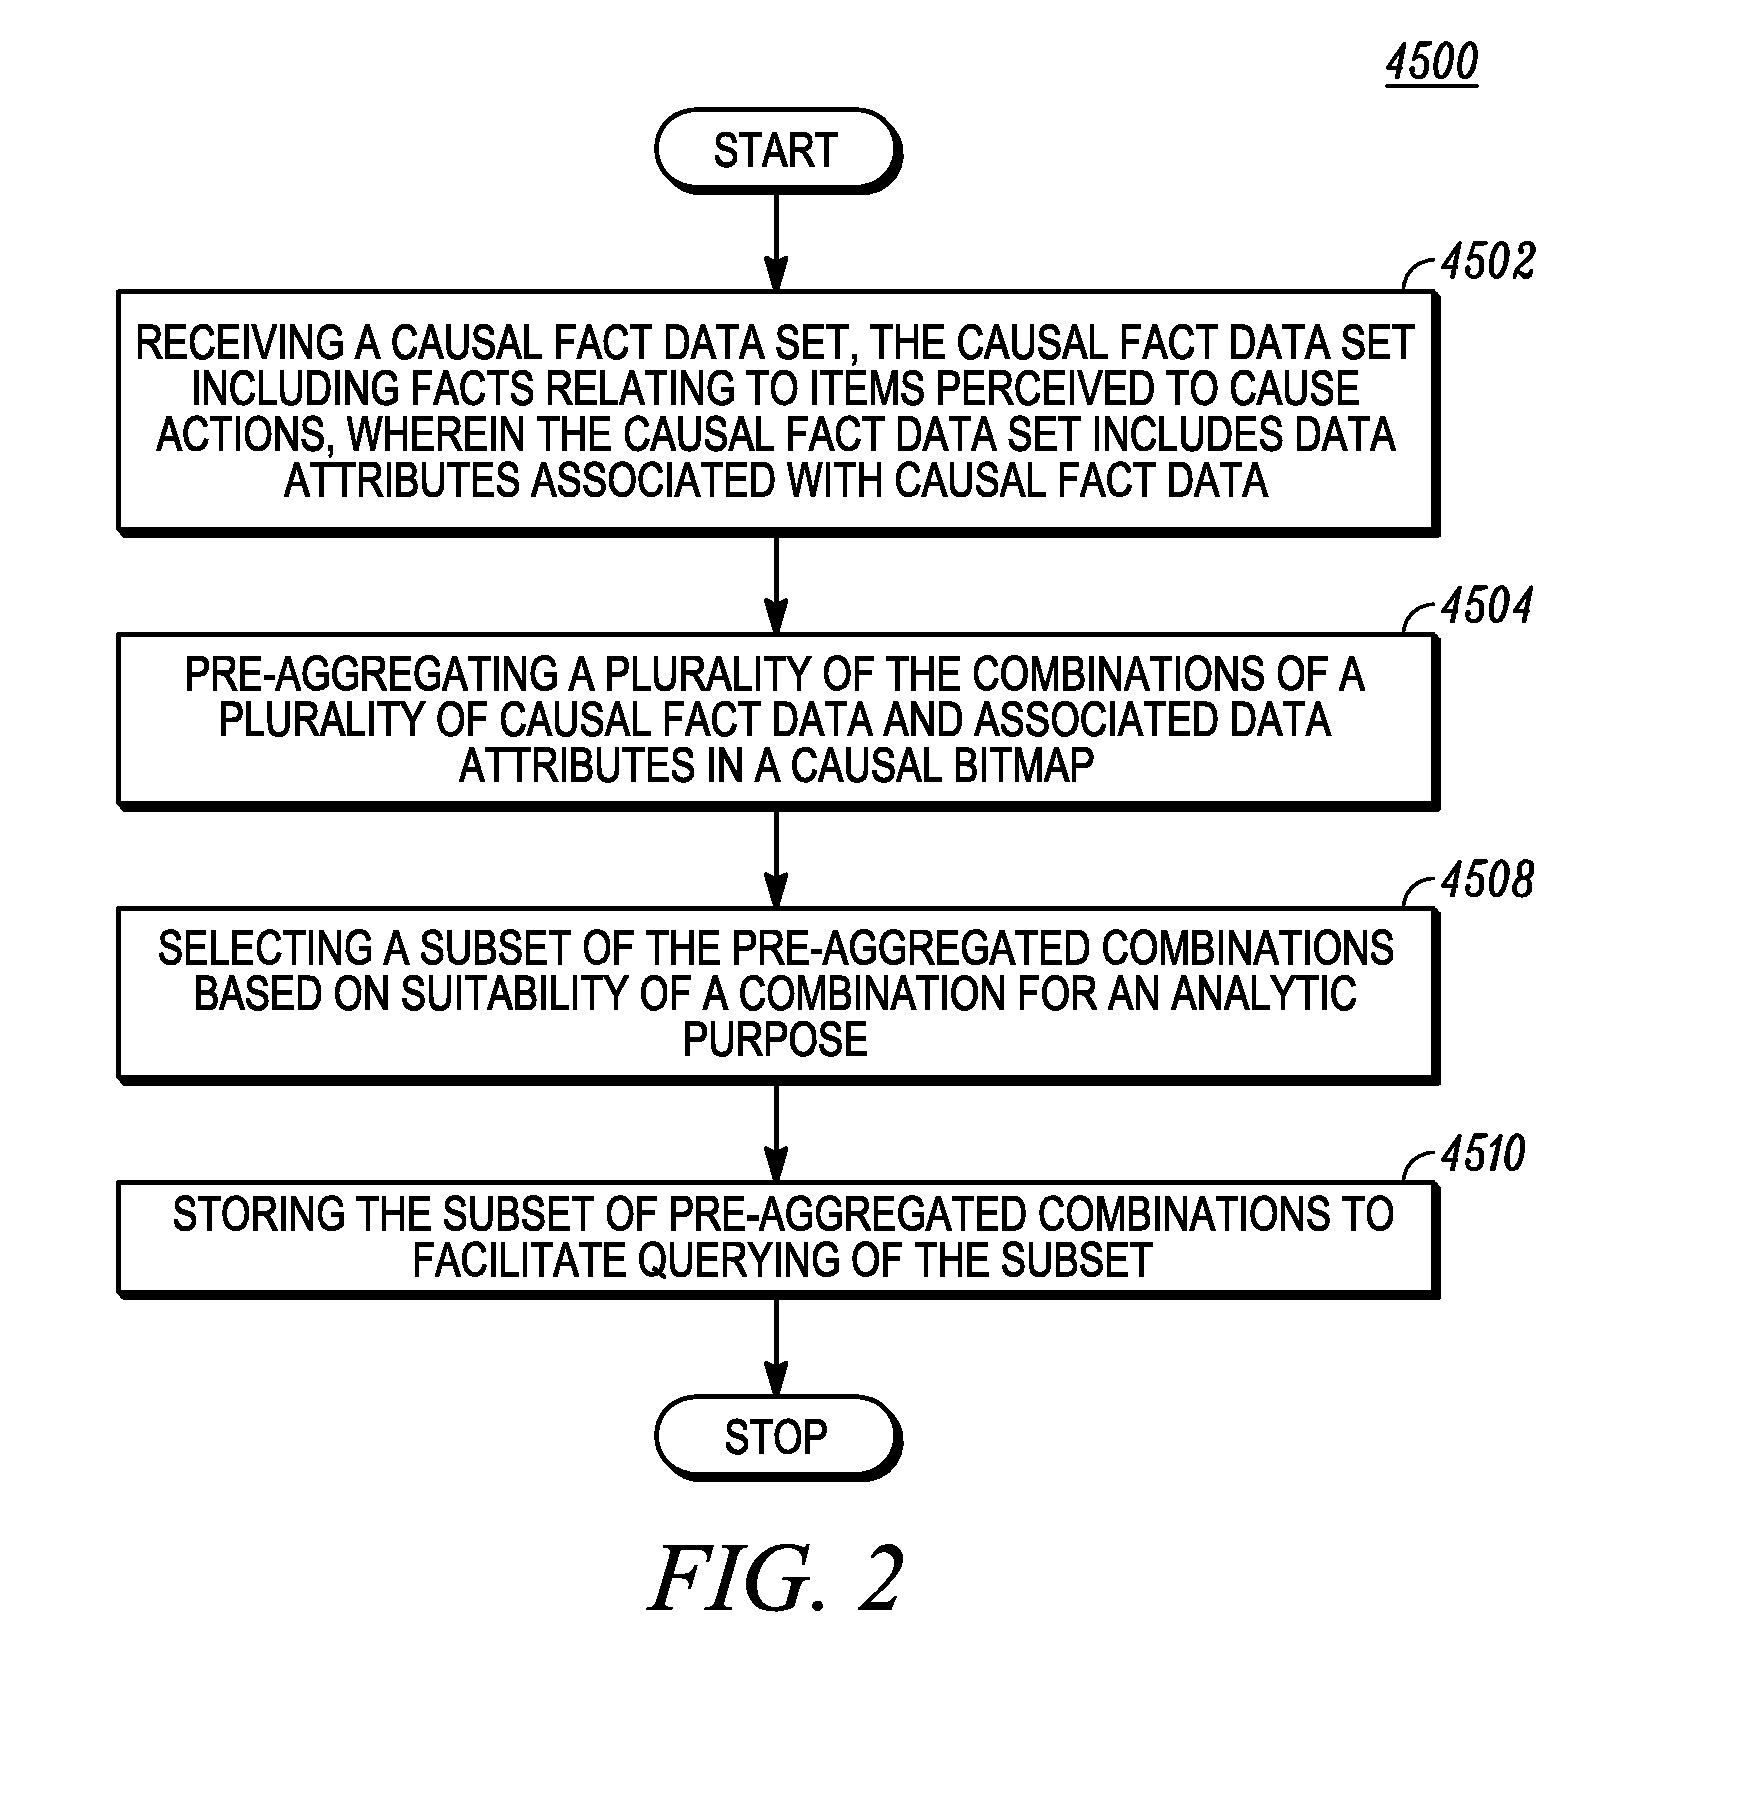 Dimensional compression using an analytic platform